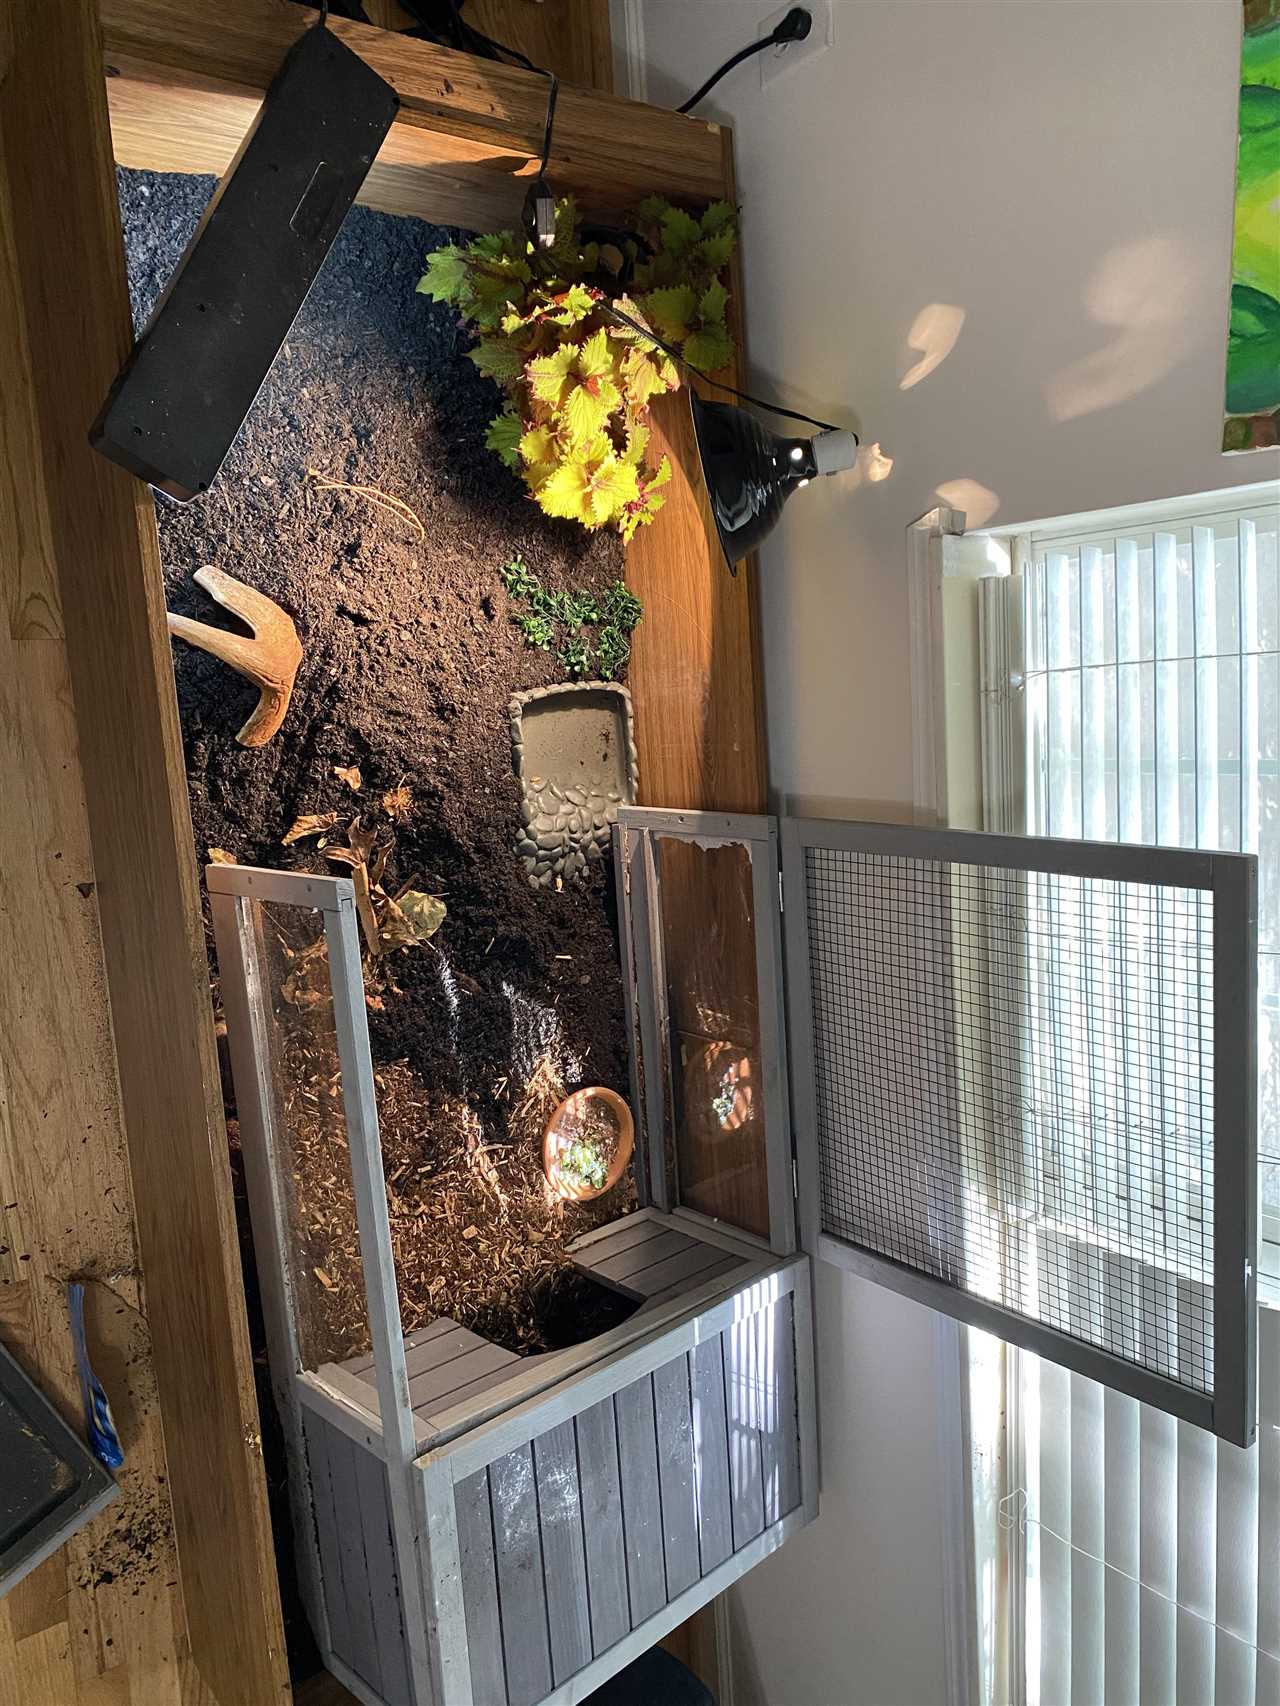 Adding Live Plants to Create an Ideal Indoor Box Turtle Habitat